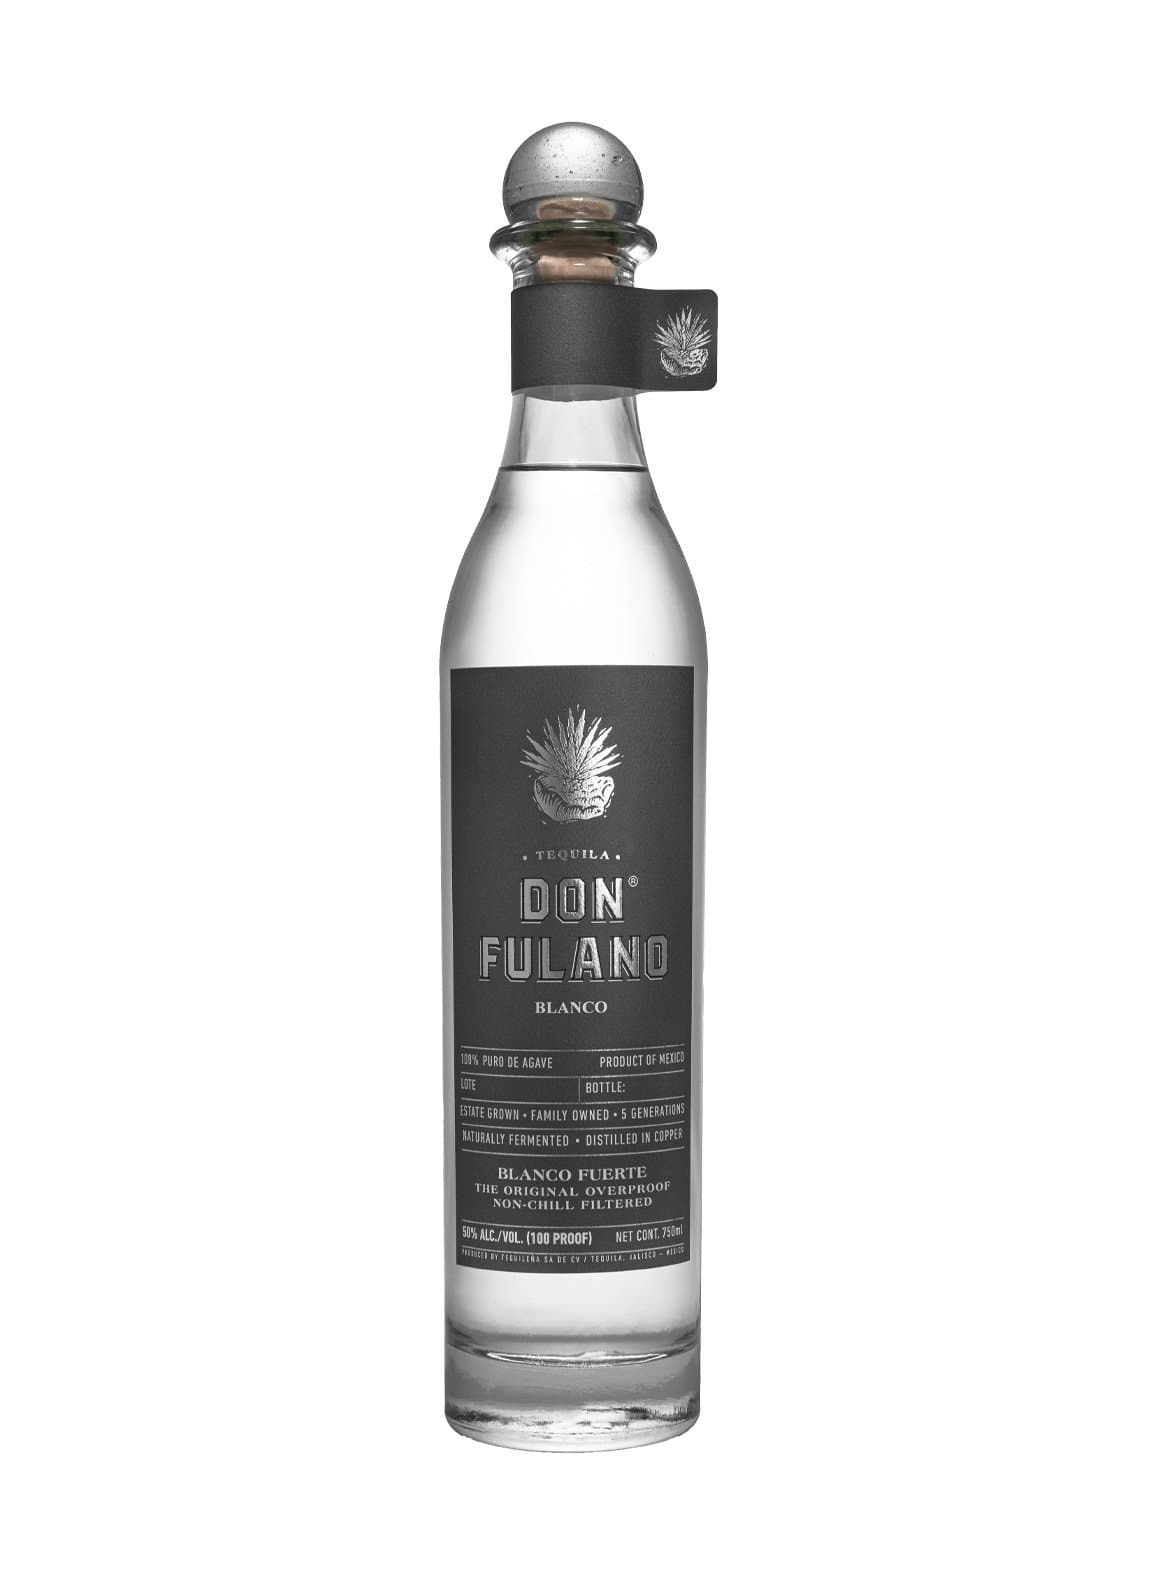 Don Fulano Fuerte 100 Proof Blanco Tequila 50% 700ml | Tequila | Shop online at Spirits of France